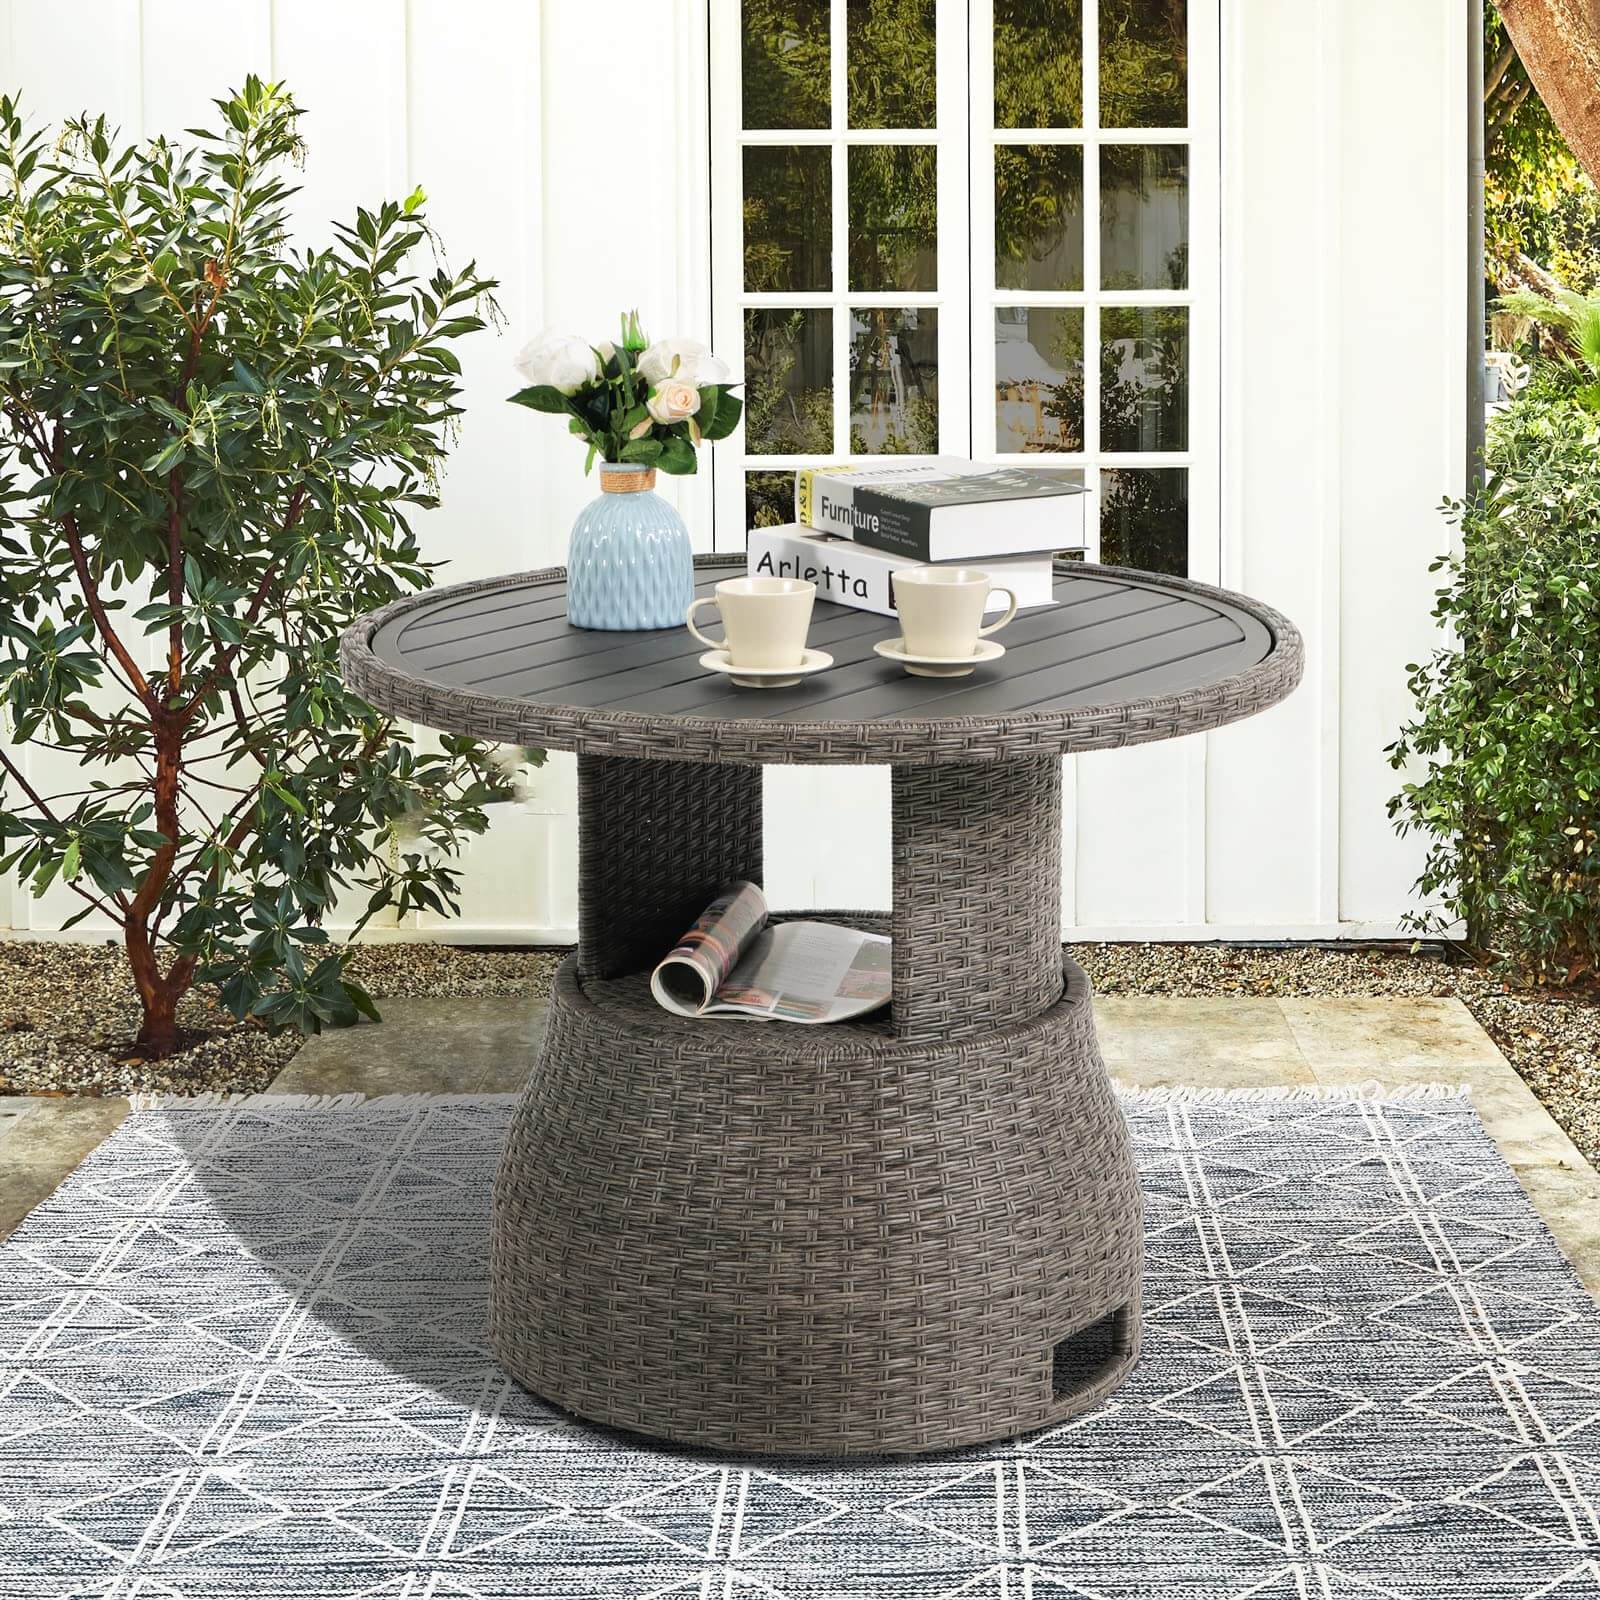 33in Wicker Dining Table, Outdoor Patio Lift Coffee Table, Round Side Table with Aluminum Tabletop, Grey